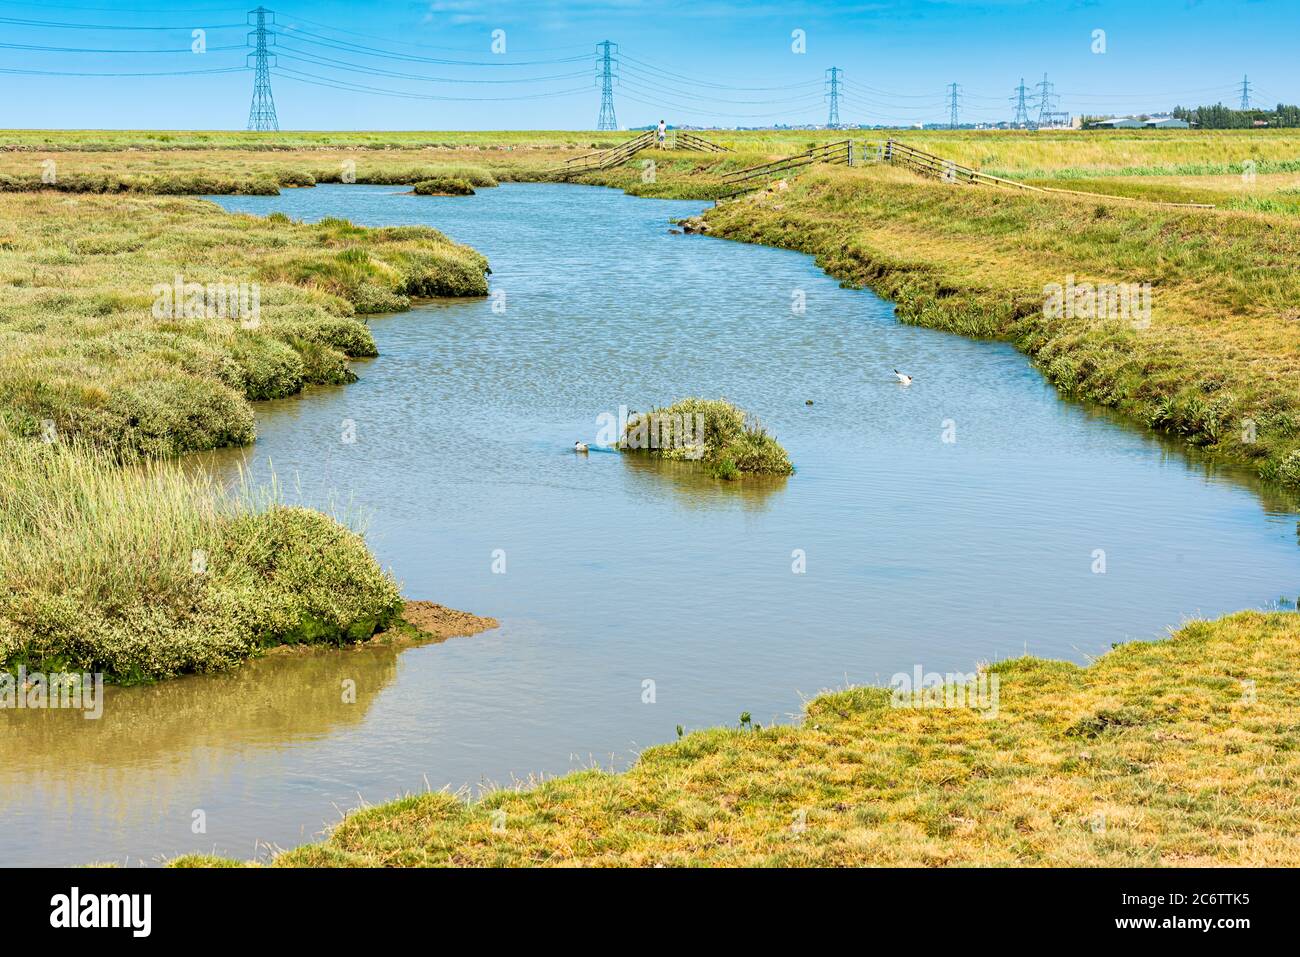 Faversham Creek and Electricity Pylons in Kent, England Stock Photo